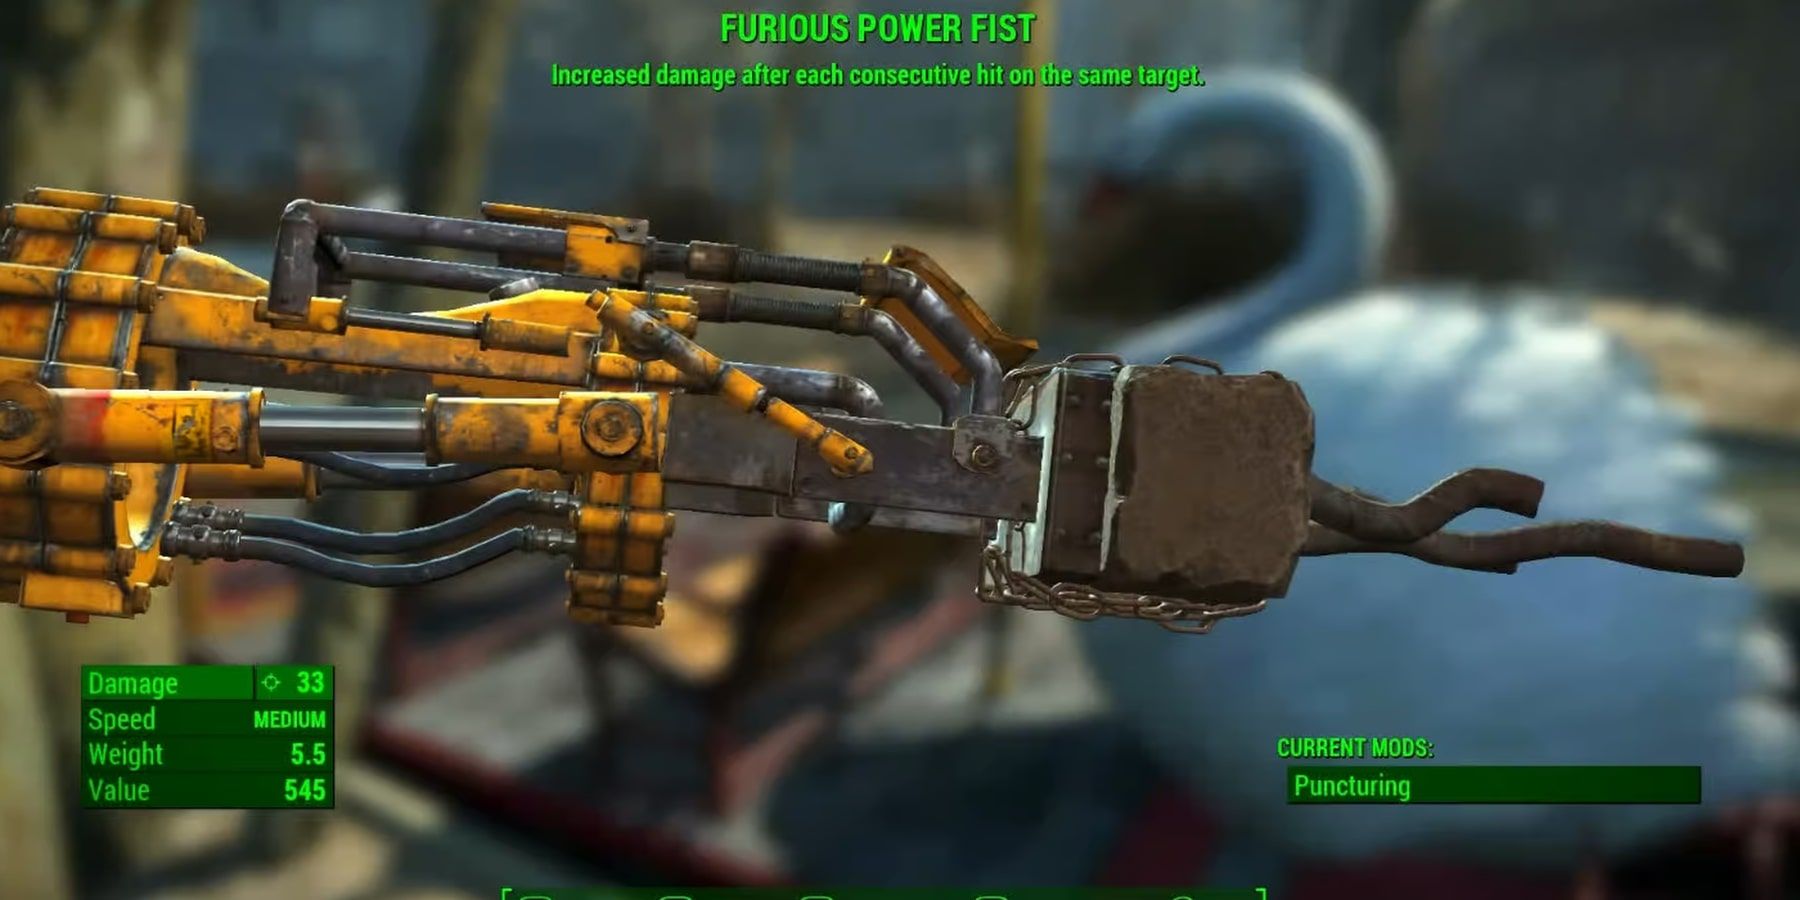 Power Fist Fallout 4